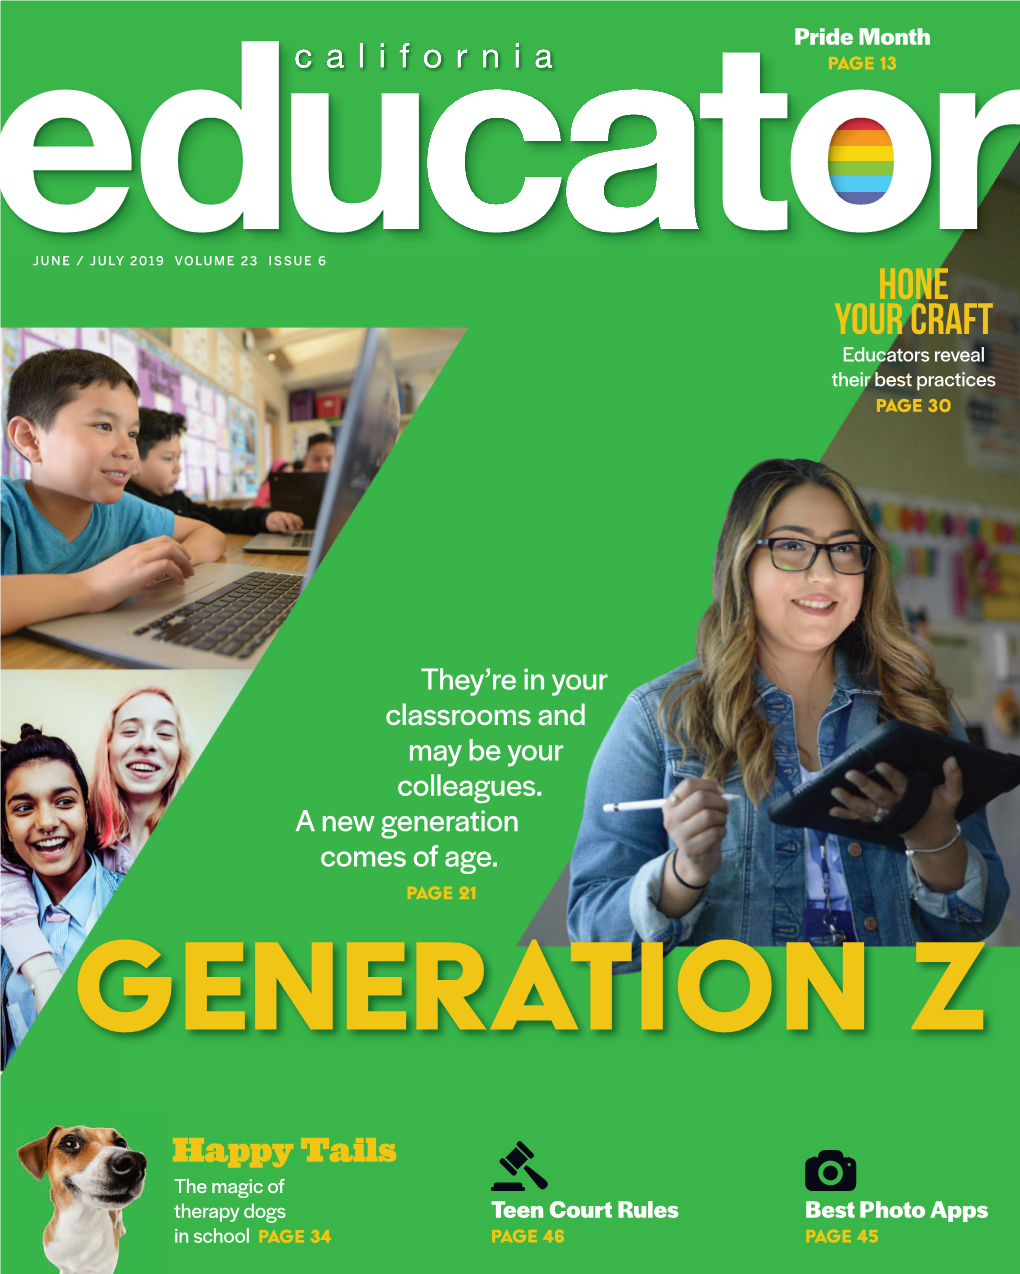 JUNE / JULY 2019 VOLUME 23 ISSUE 6 Hone Your Craft Educators Reveal Their Best Practices Page 30